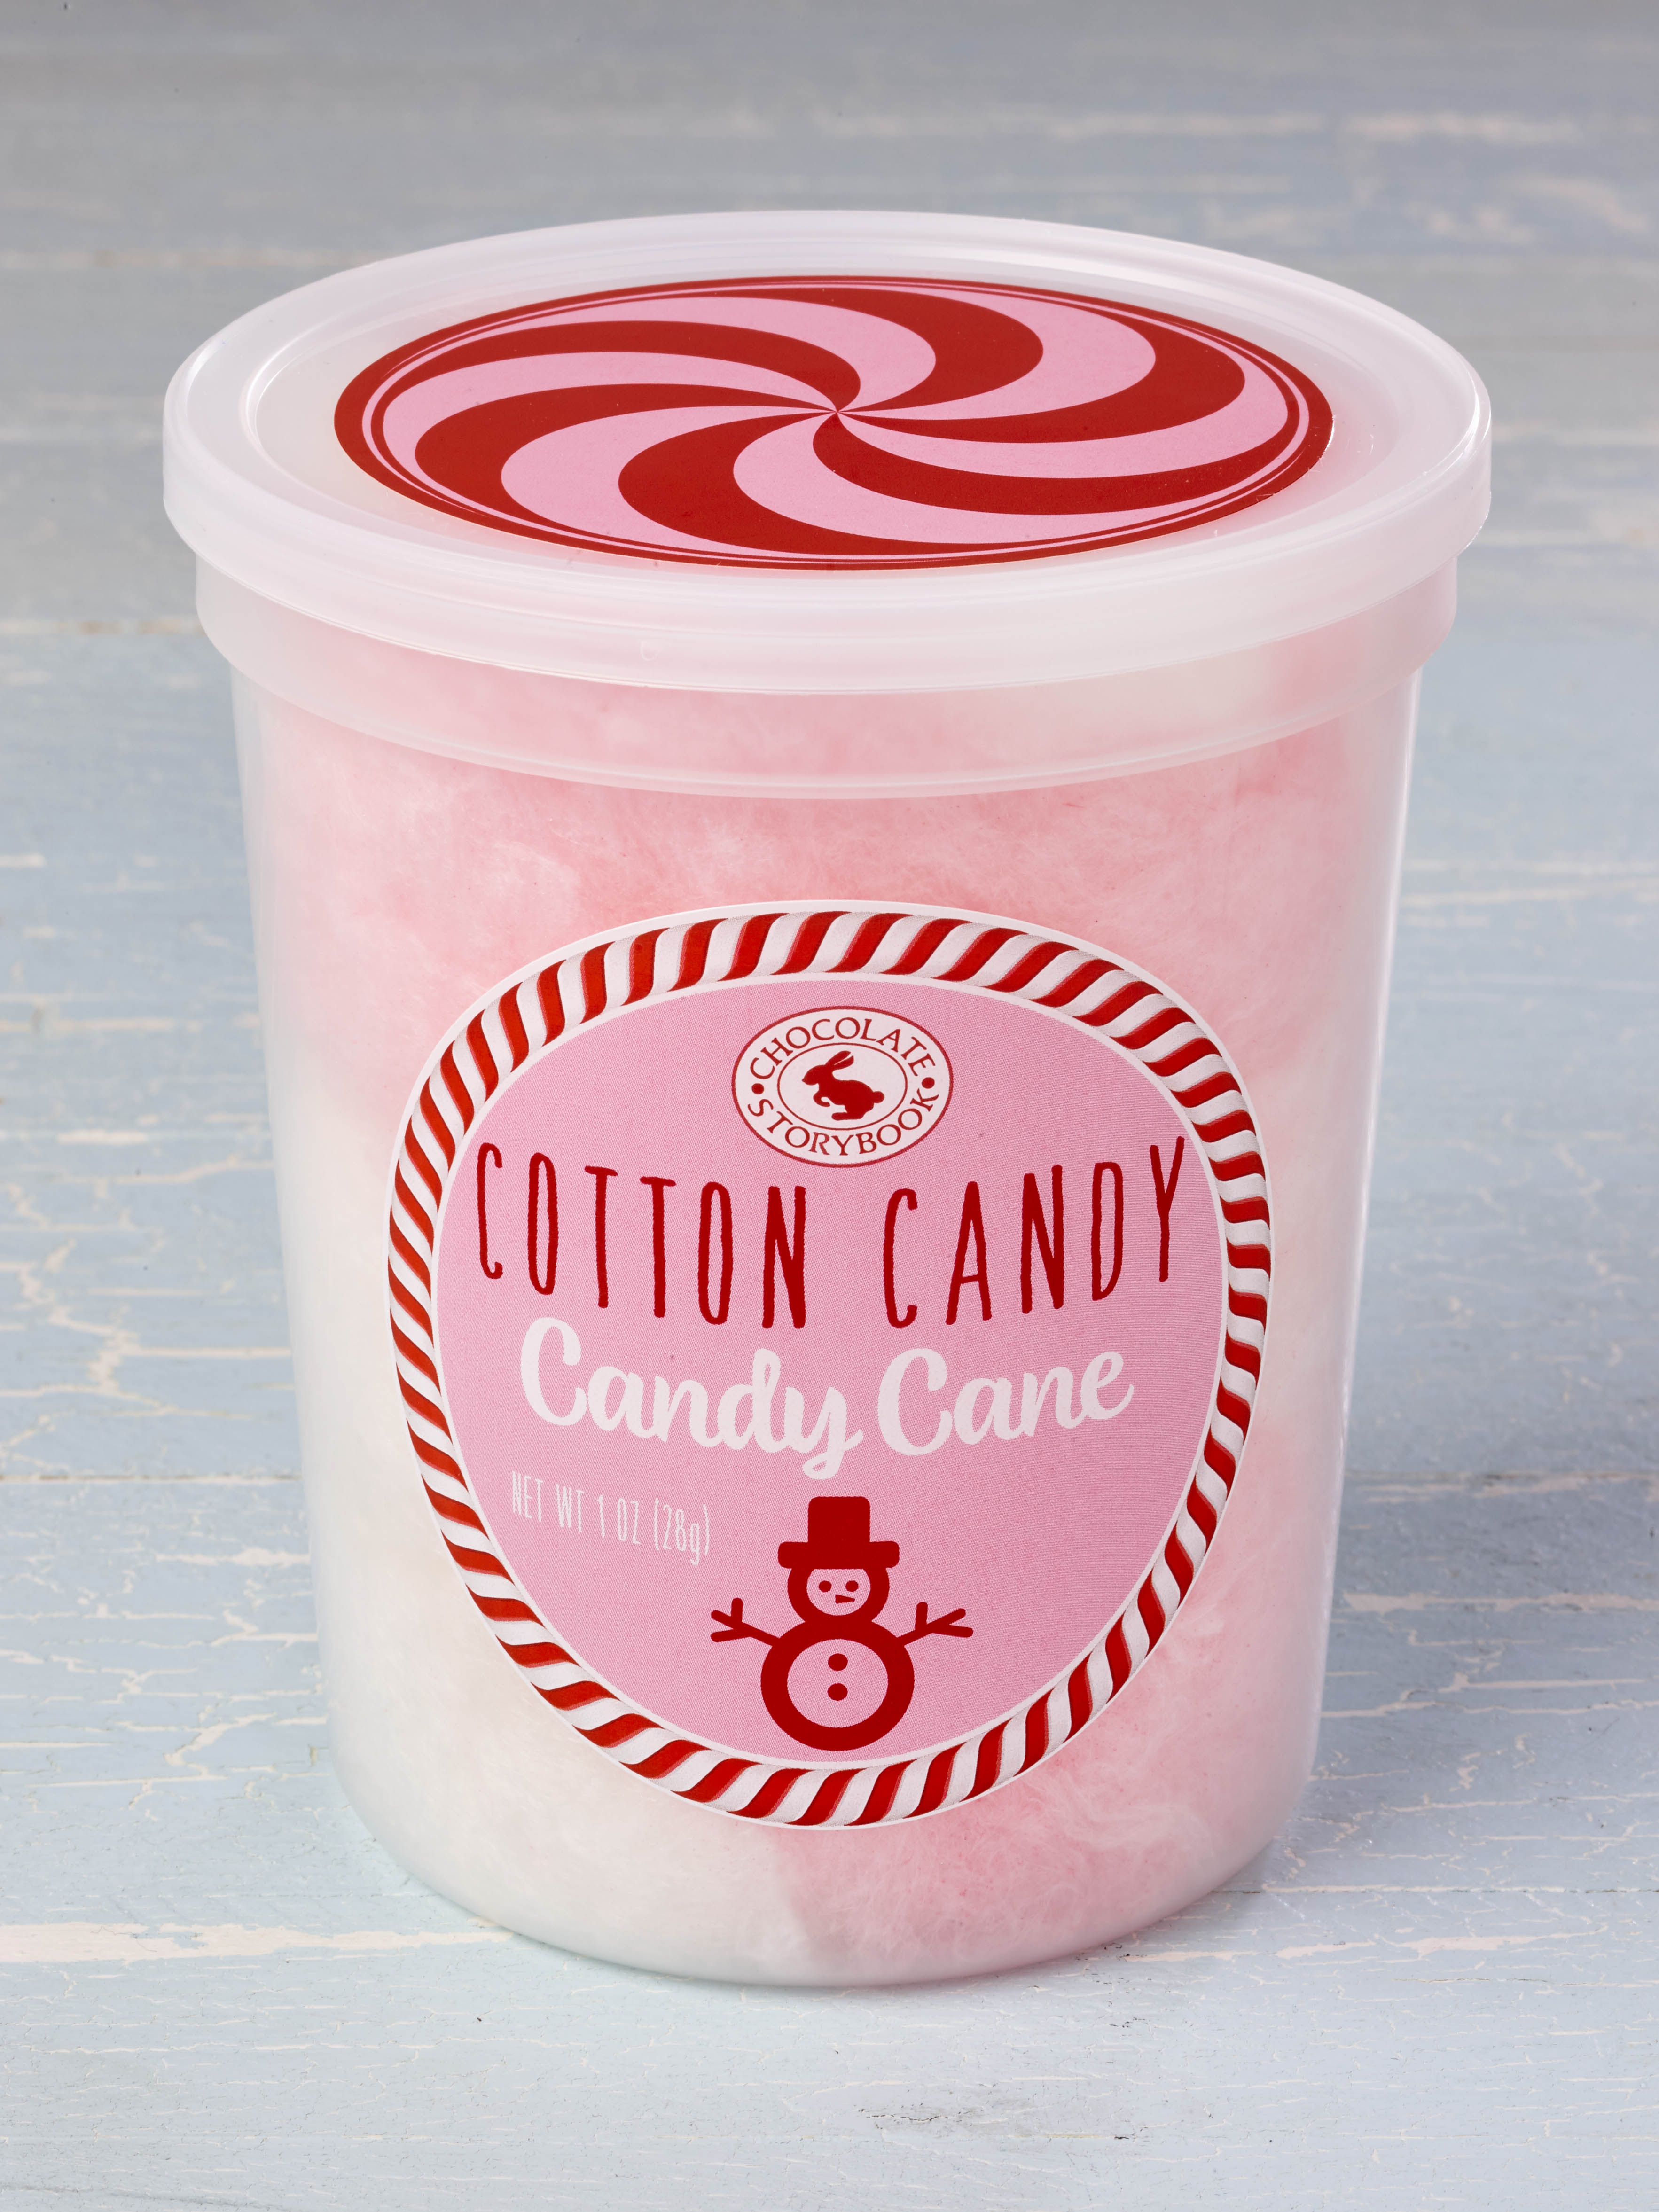 Candy Cane Cotton Candy | Custom, Handmade Chocolates & Gifts by ...